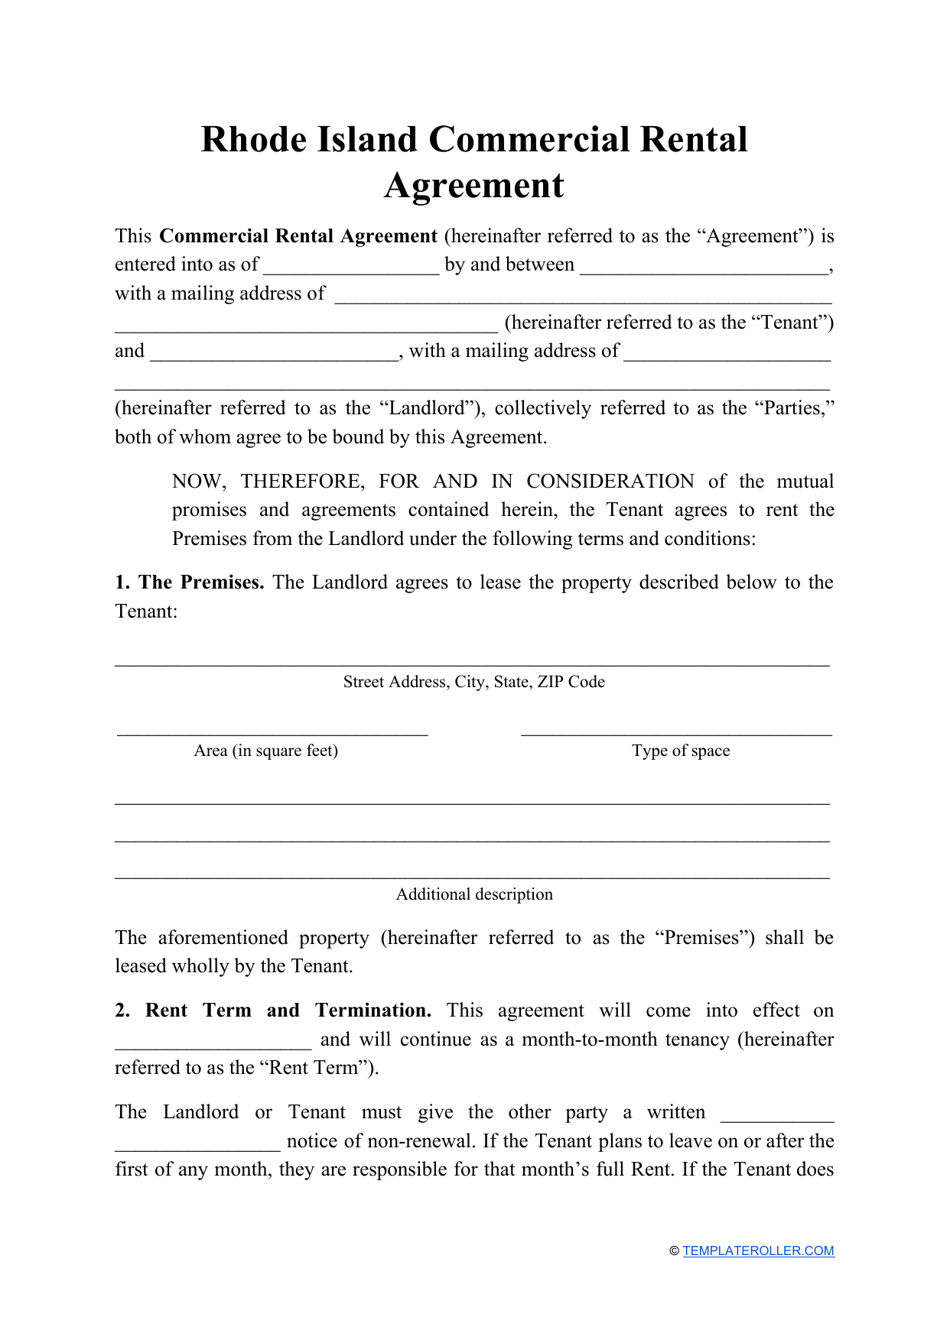 Commercial Rental Agreement Template - Rhode Island, Page 1